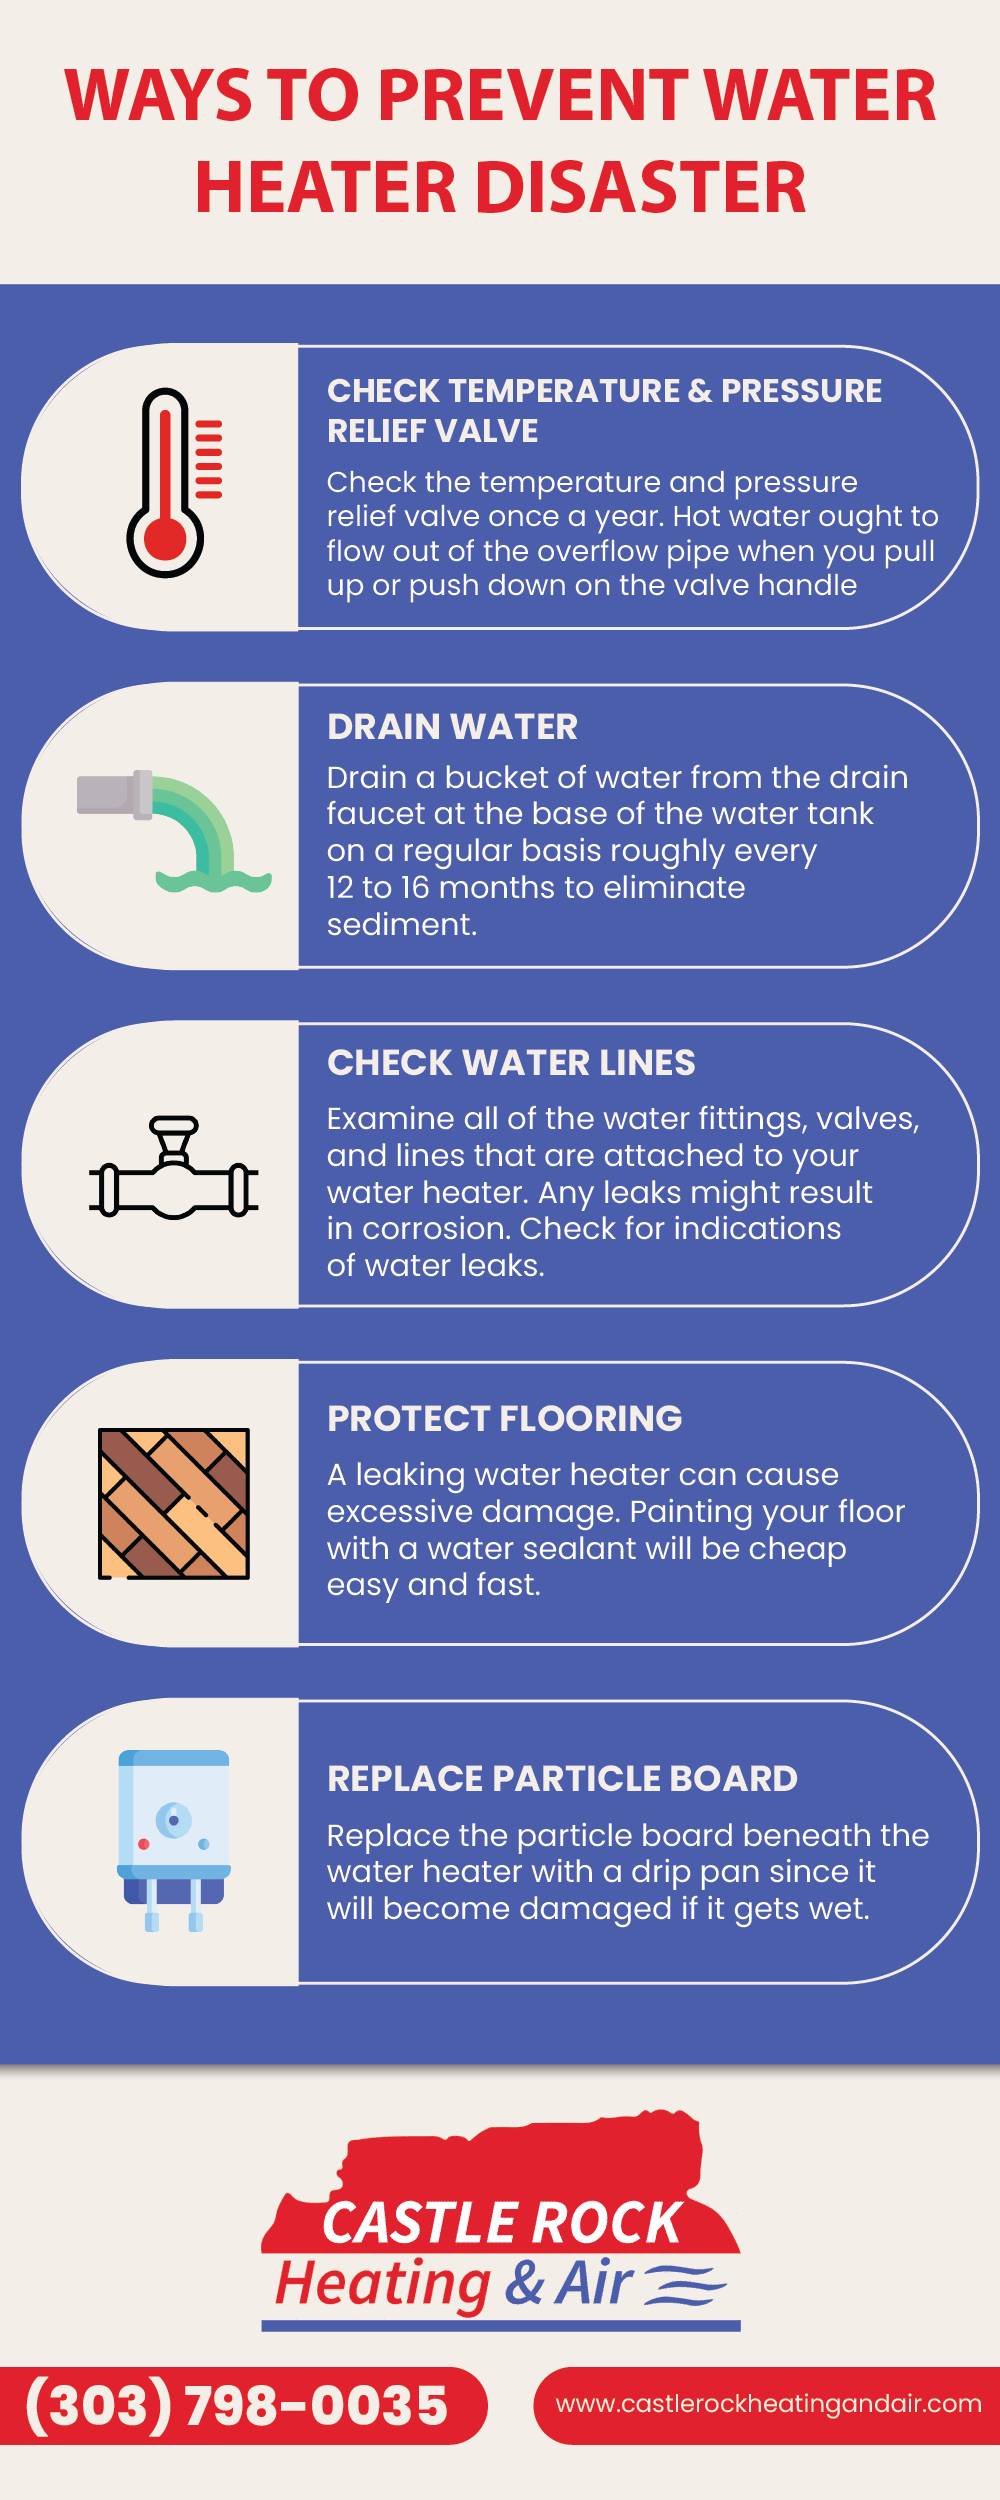 Ways To Prevent Water Heater Disaster